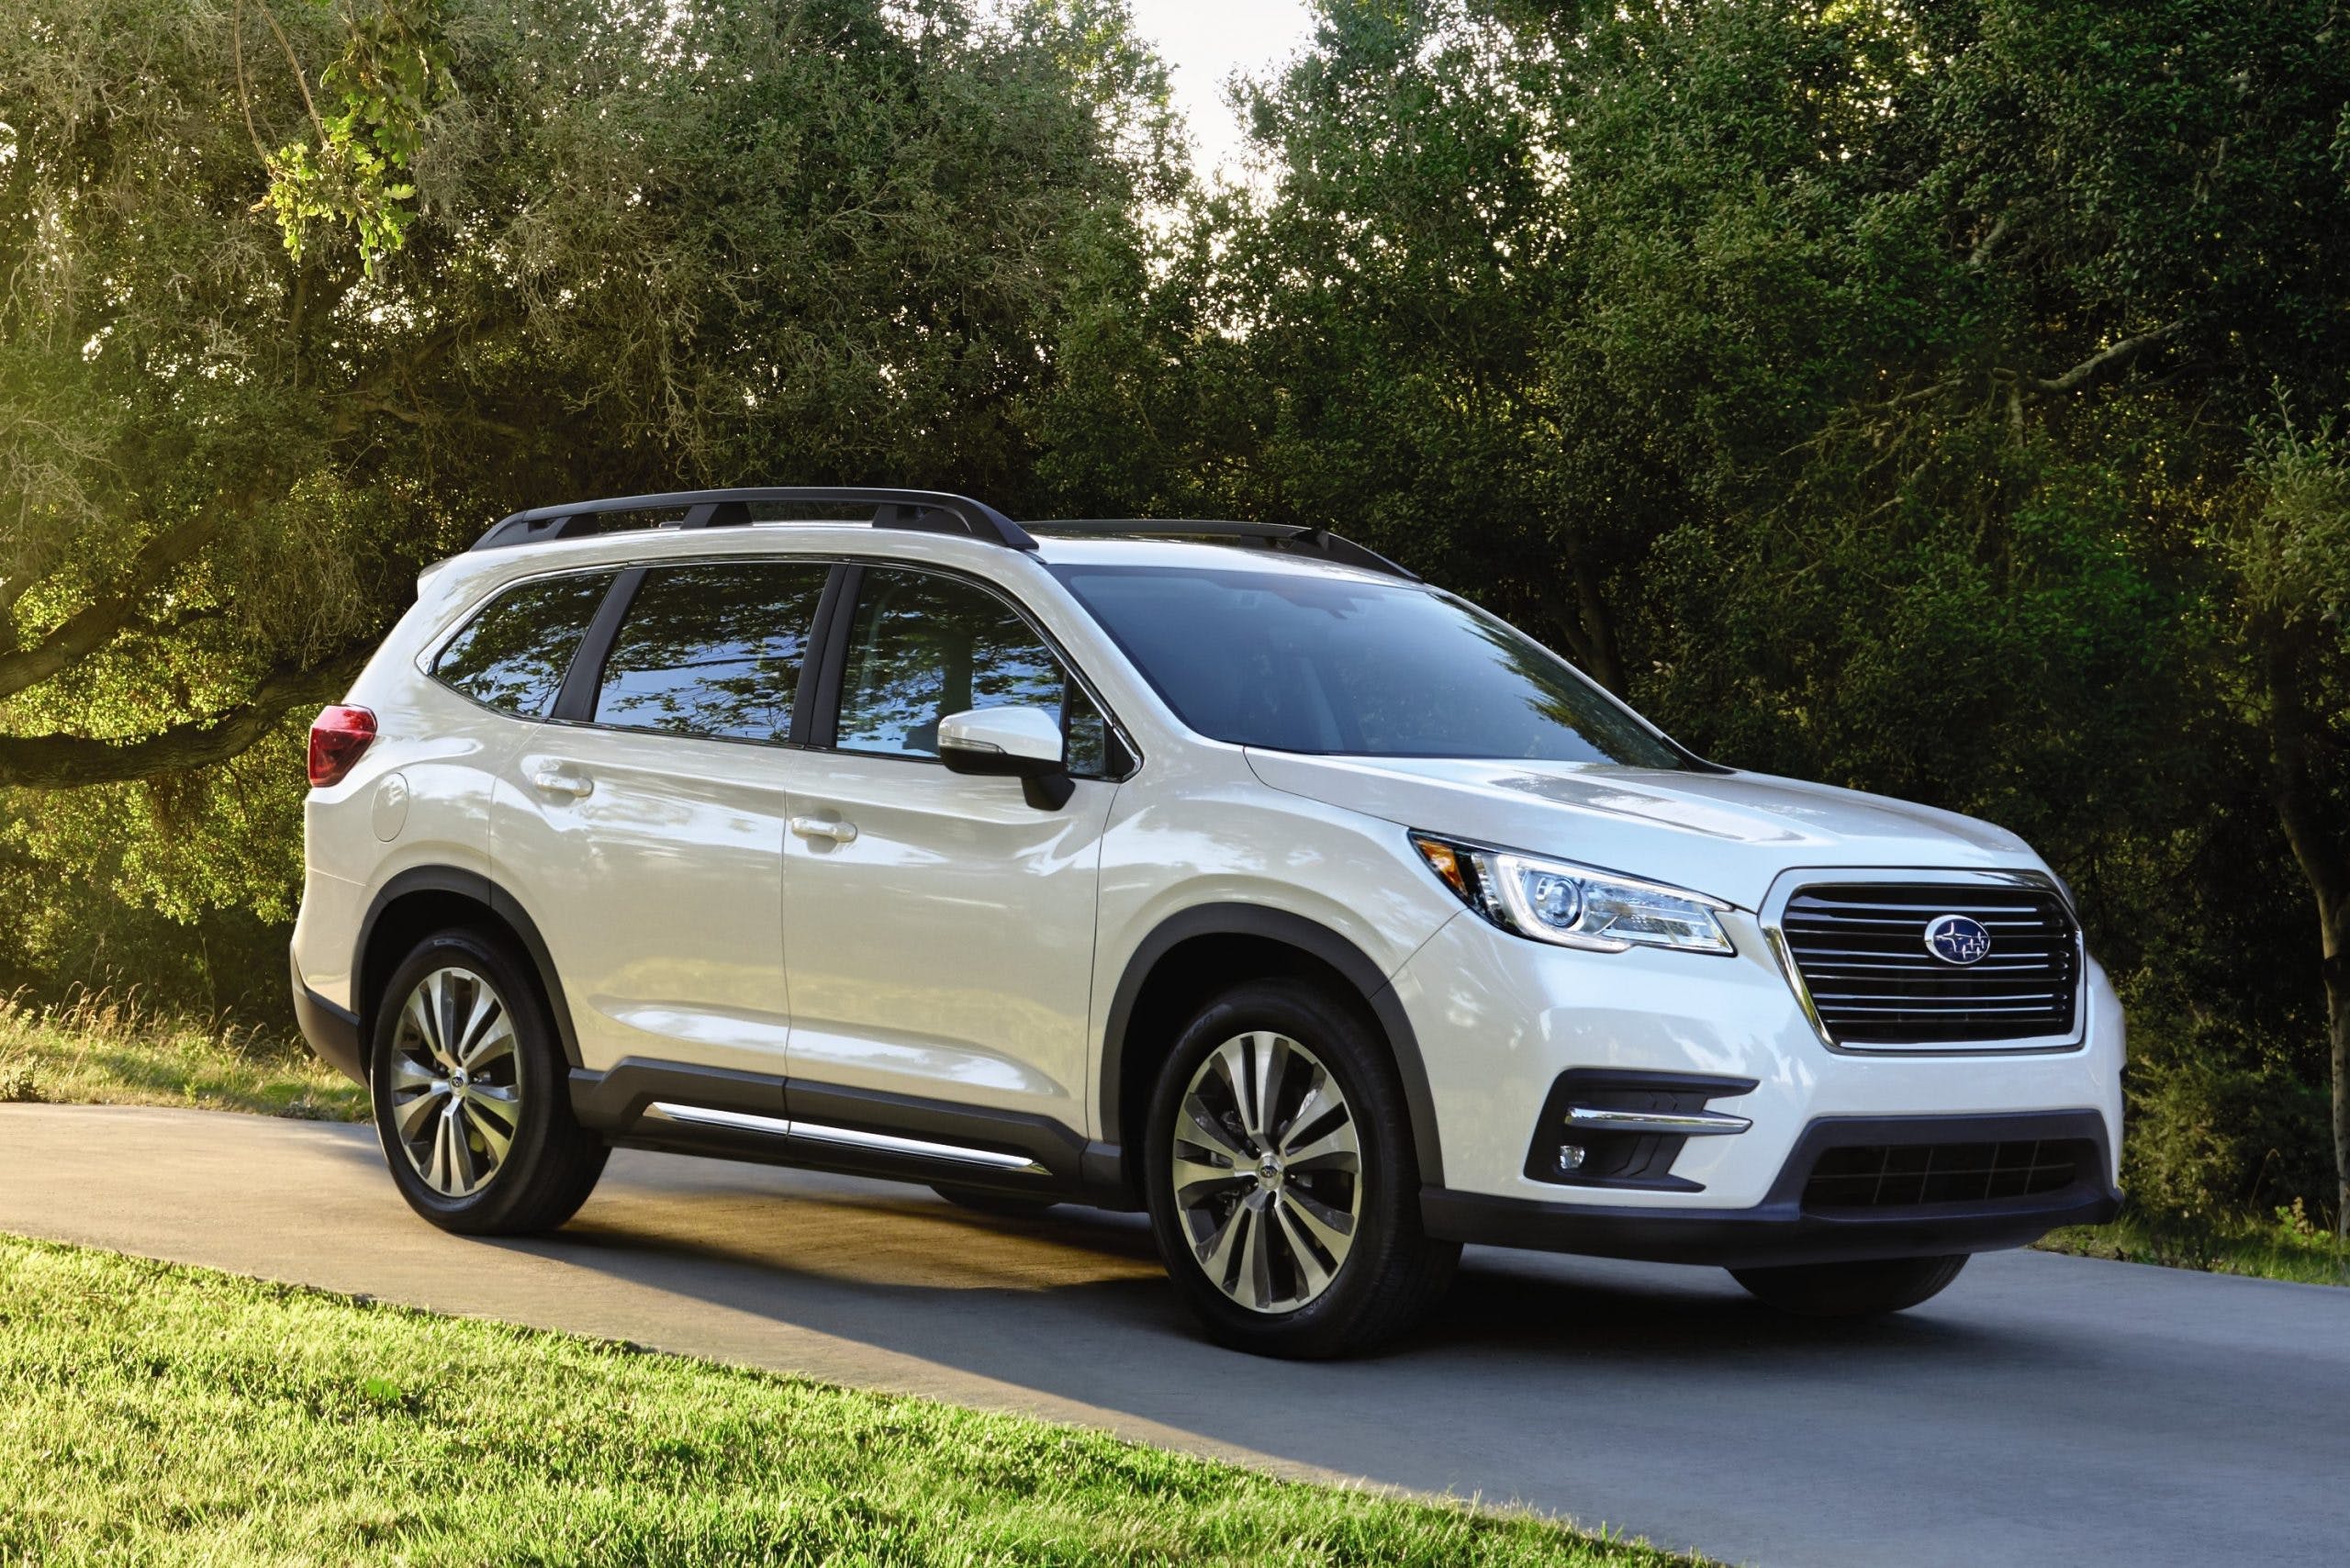 Test Drive: 2021 Subaru Ascent Limited Review - CARFAX